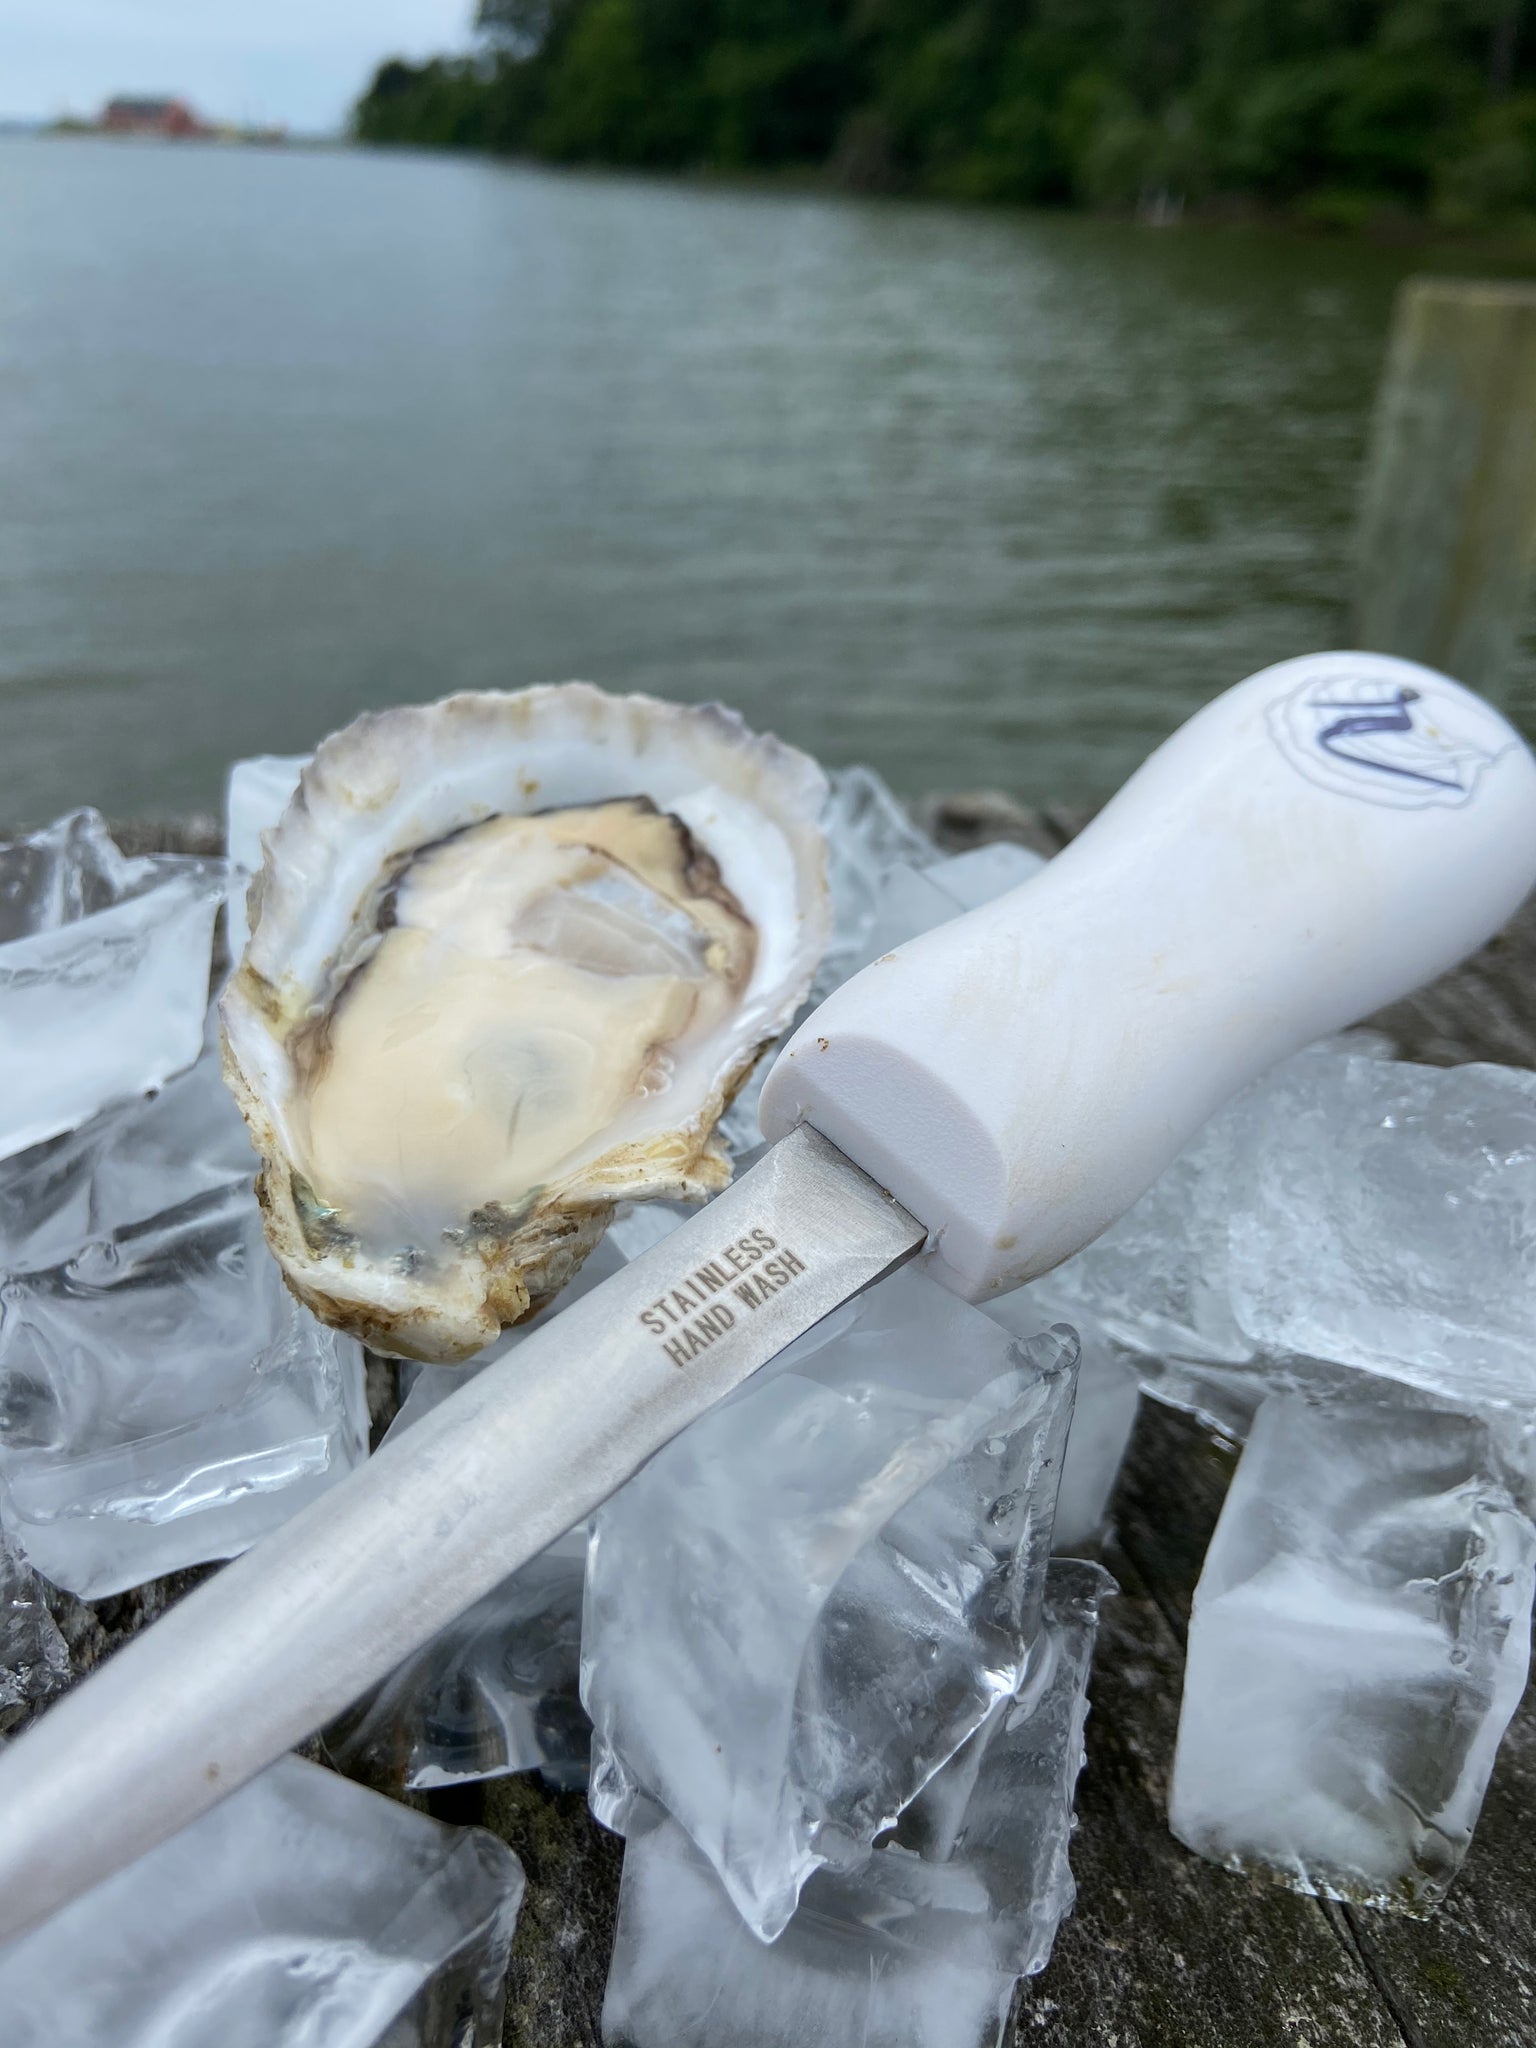 How to Shuck an Oyster